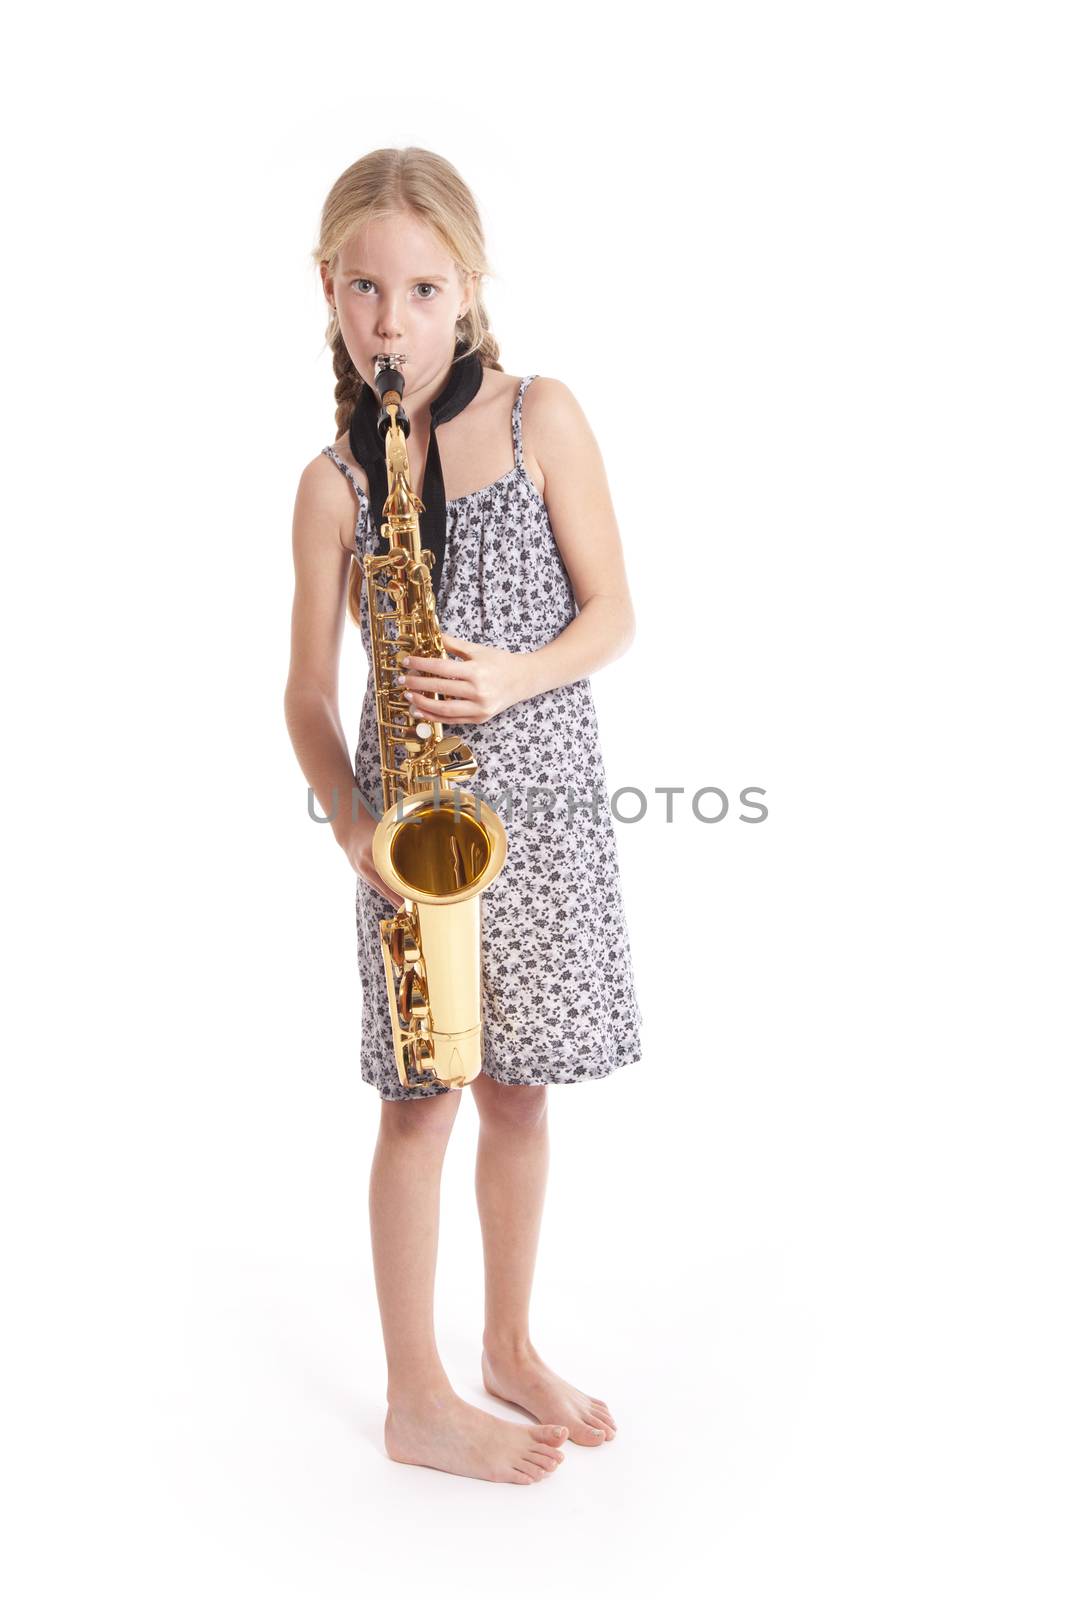 young girl in dress playing saxophone standing by ahavelaar